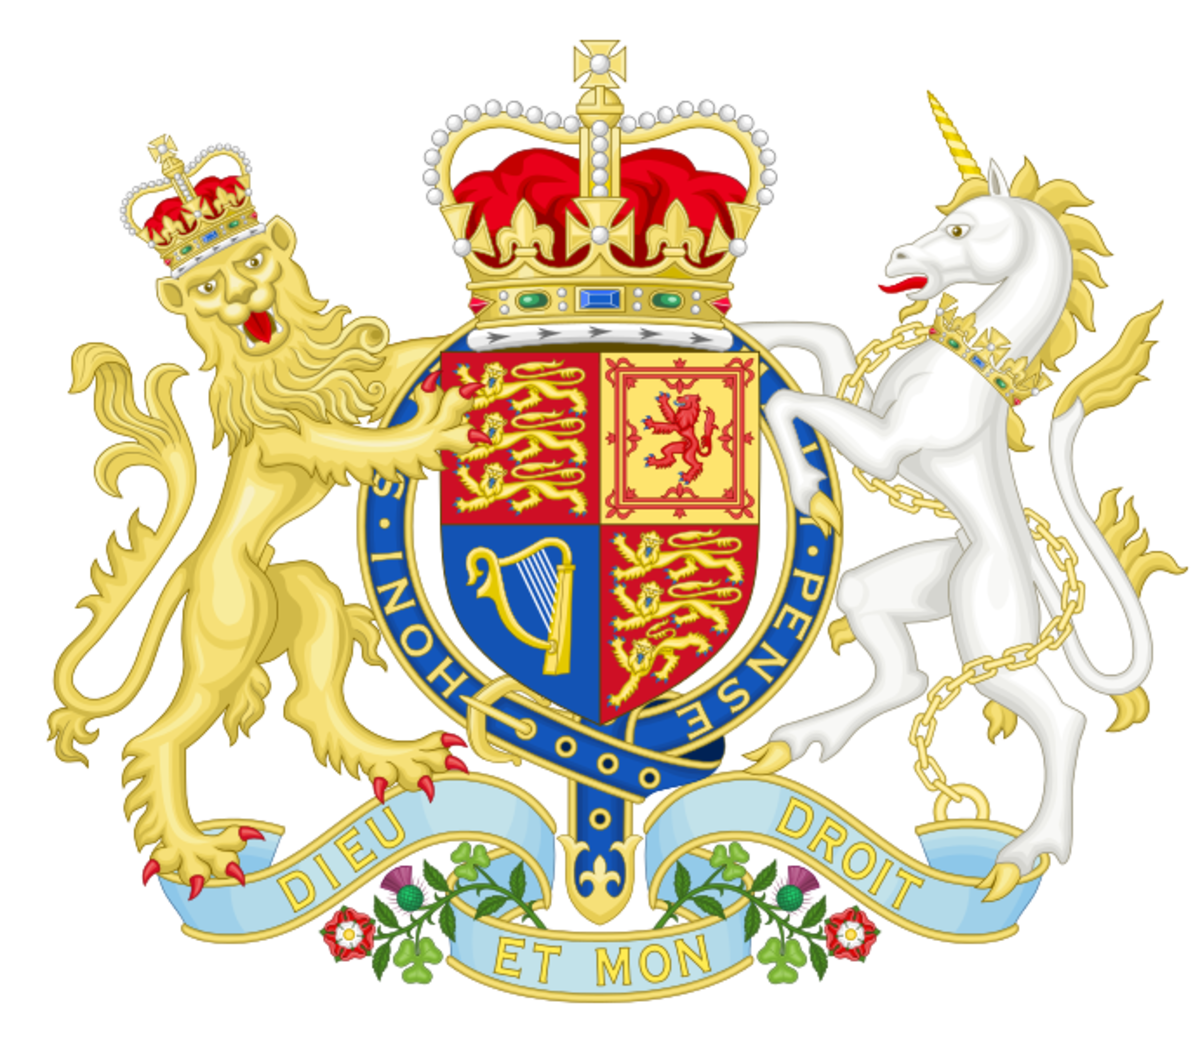 England's Royal Coat of Arms.